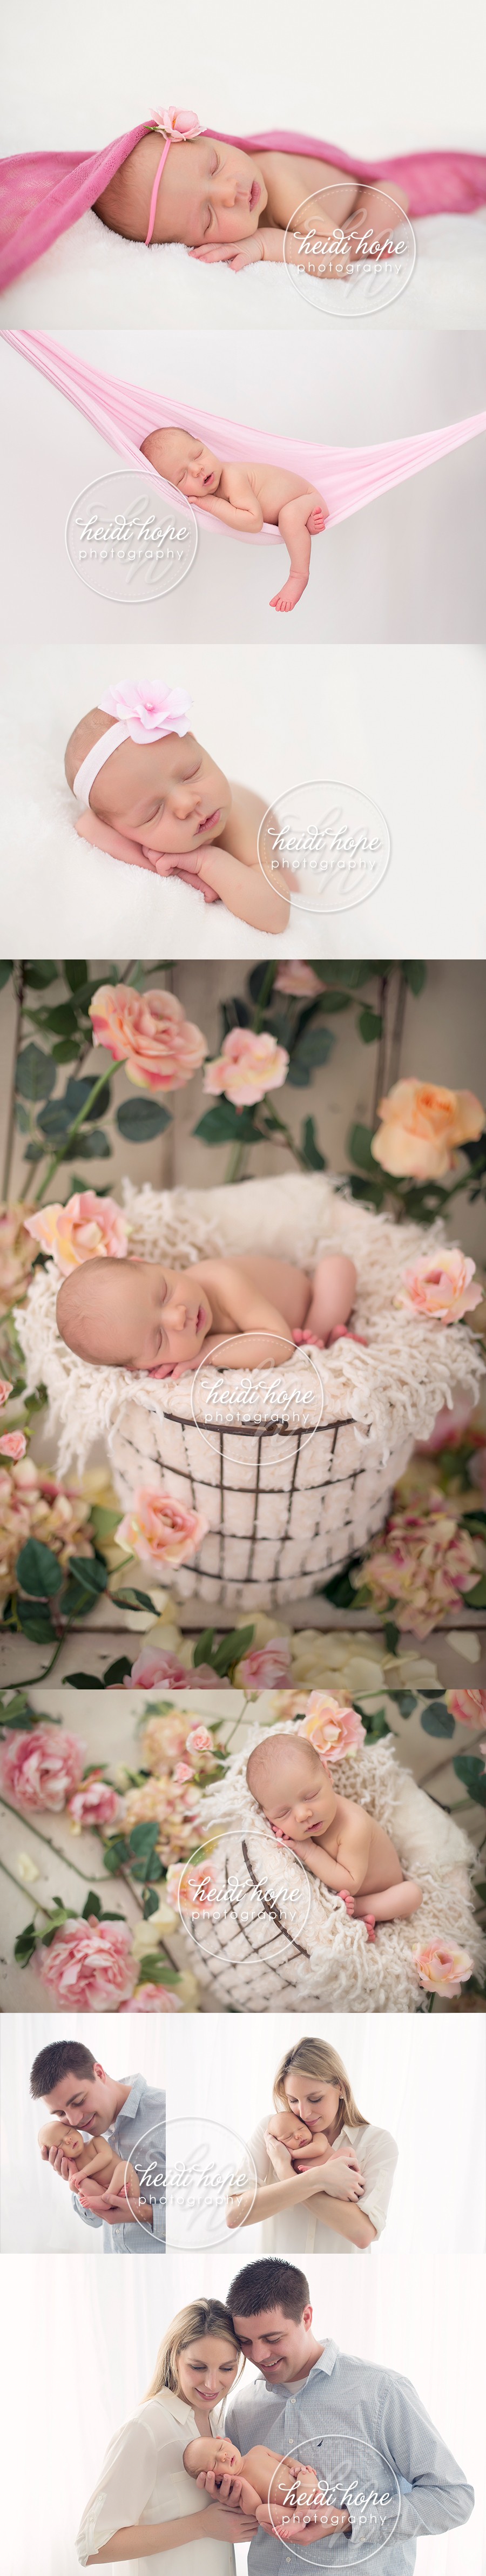 spring newborn baby girl in the flowers with family